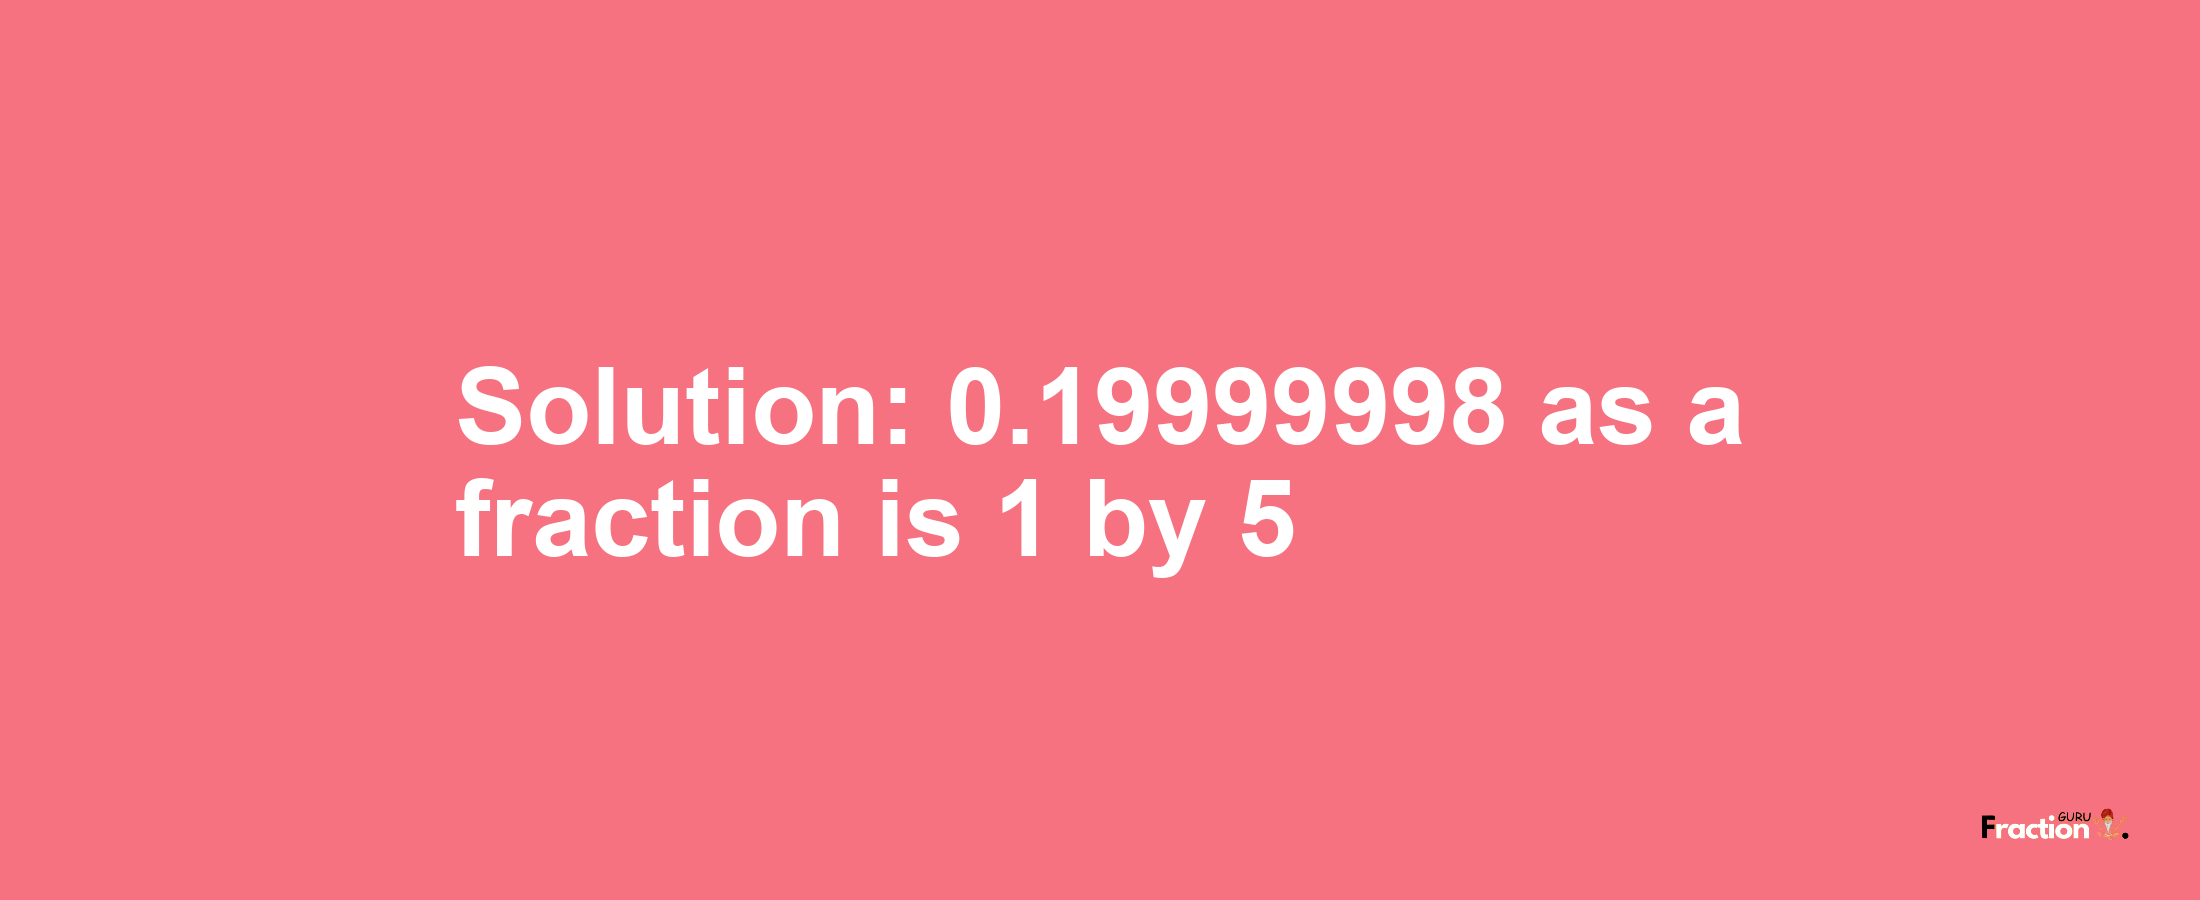 Solution:0.19999998 as a fraction is 1/5